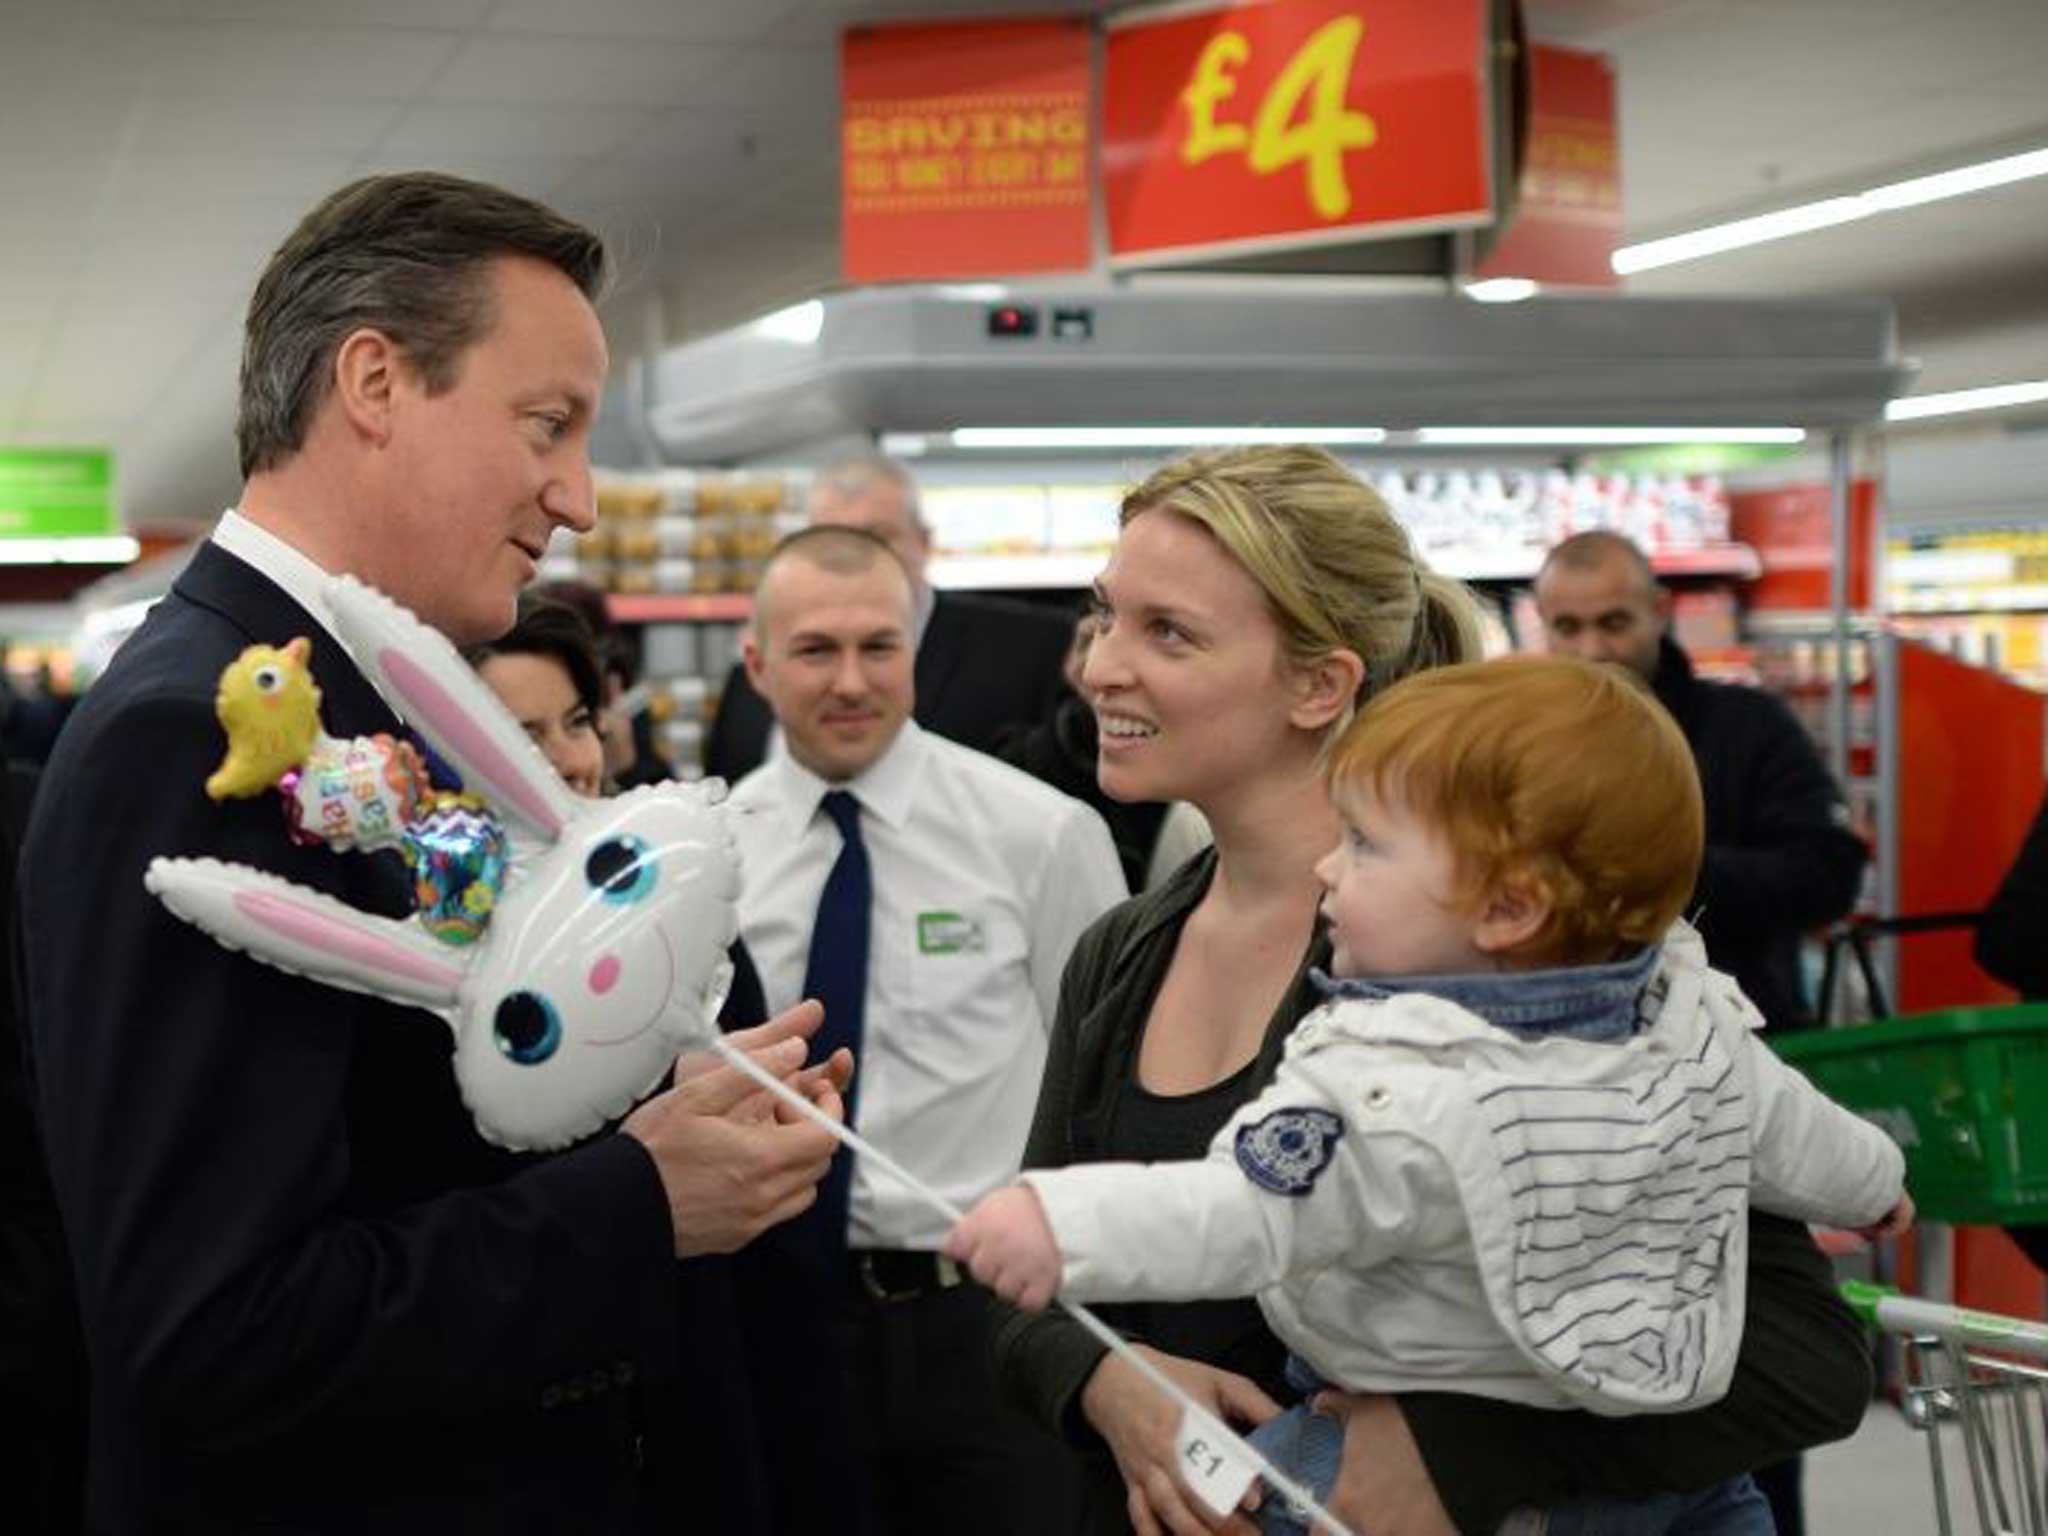 You talk, aisle listen: Cameron gets down with the kids, and their mums, at Asda